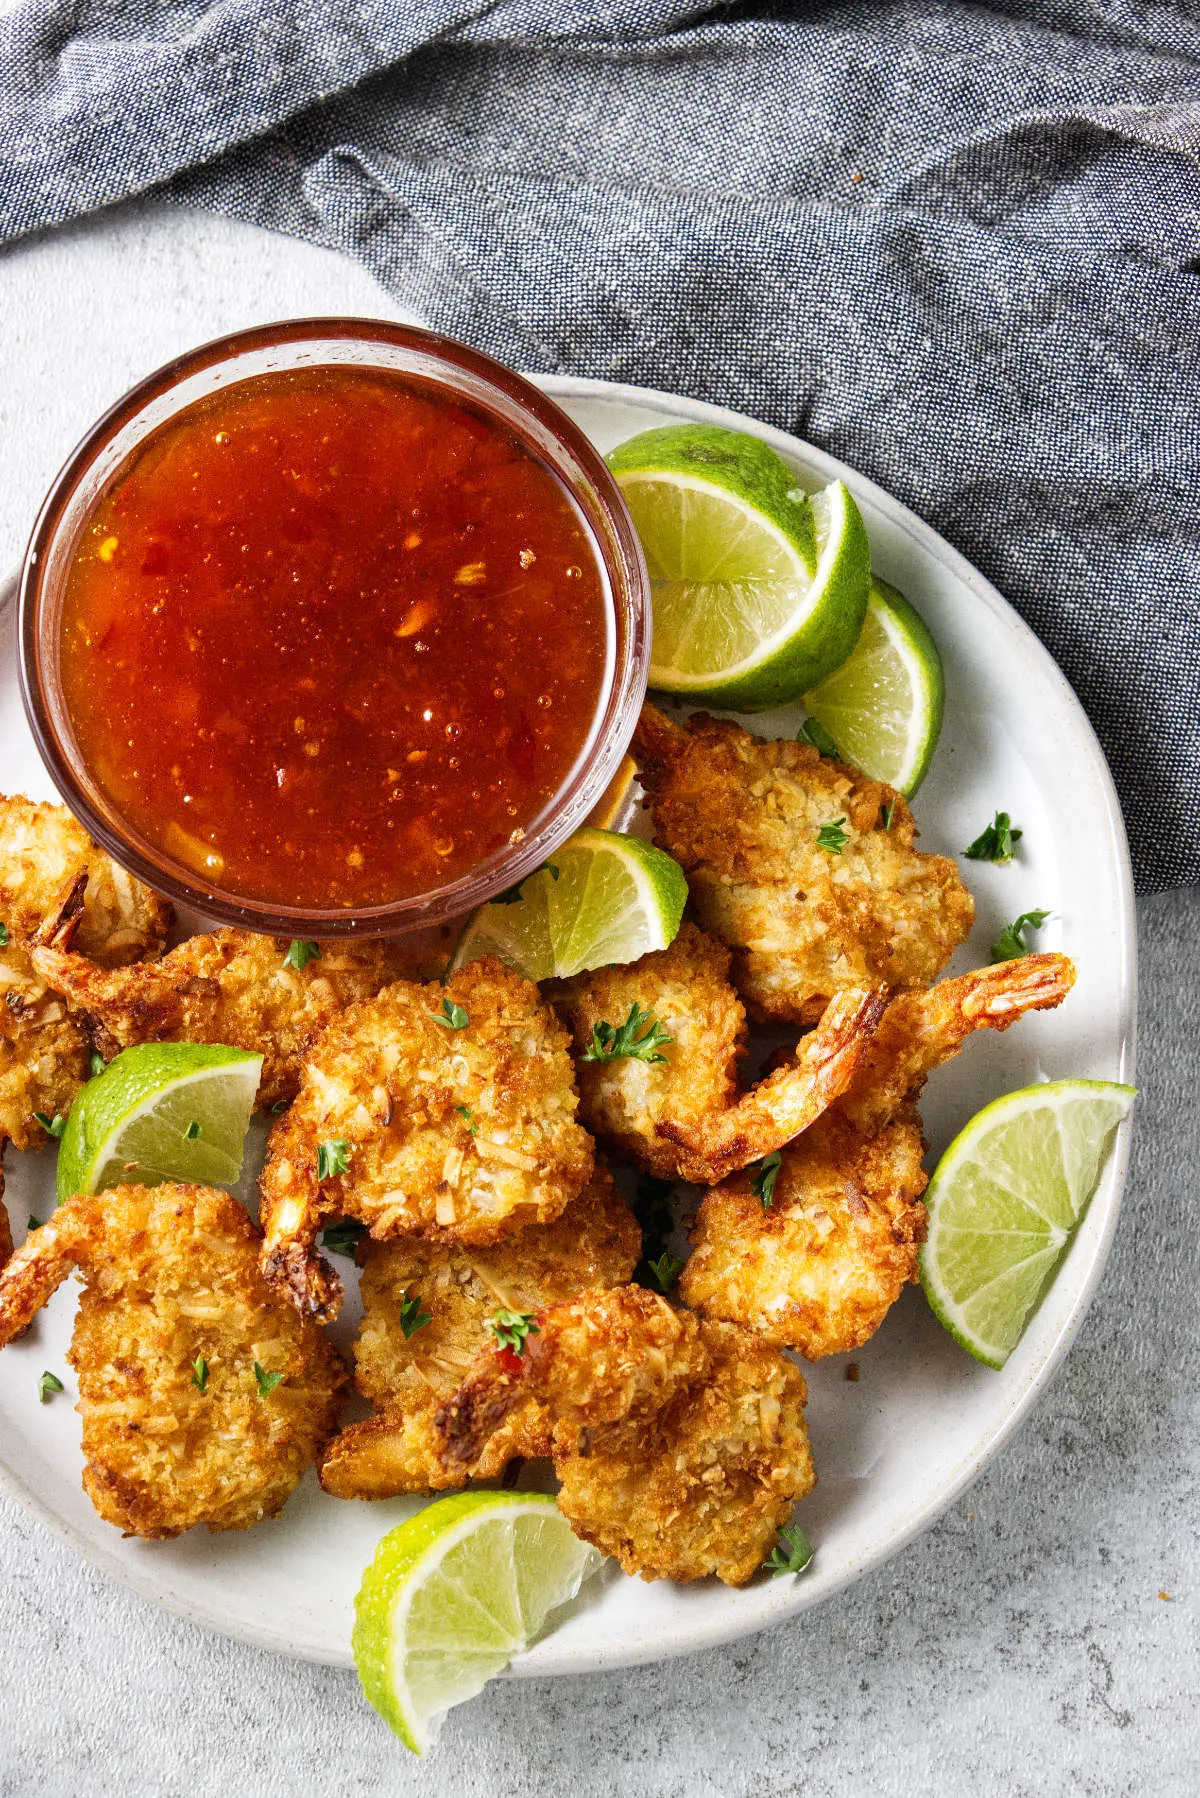 A plate of coconut shrimp and lime wedges next to a dish of dipping sauce.